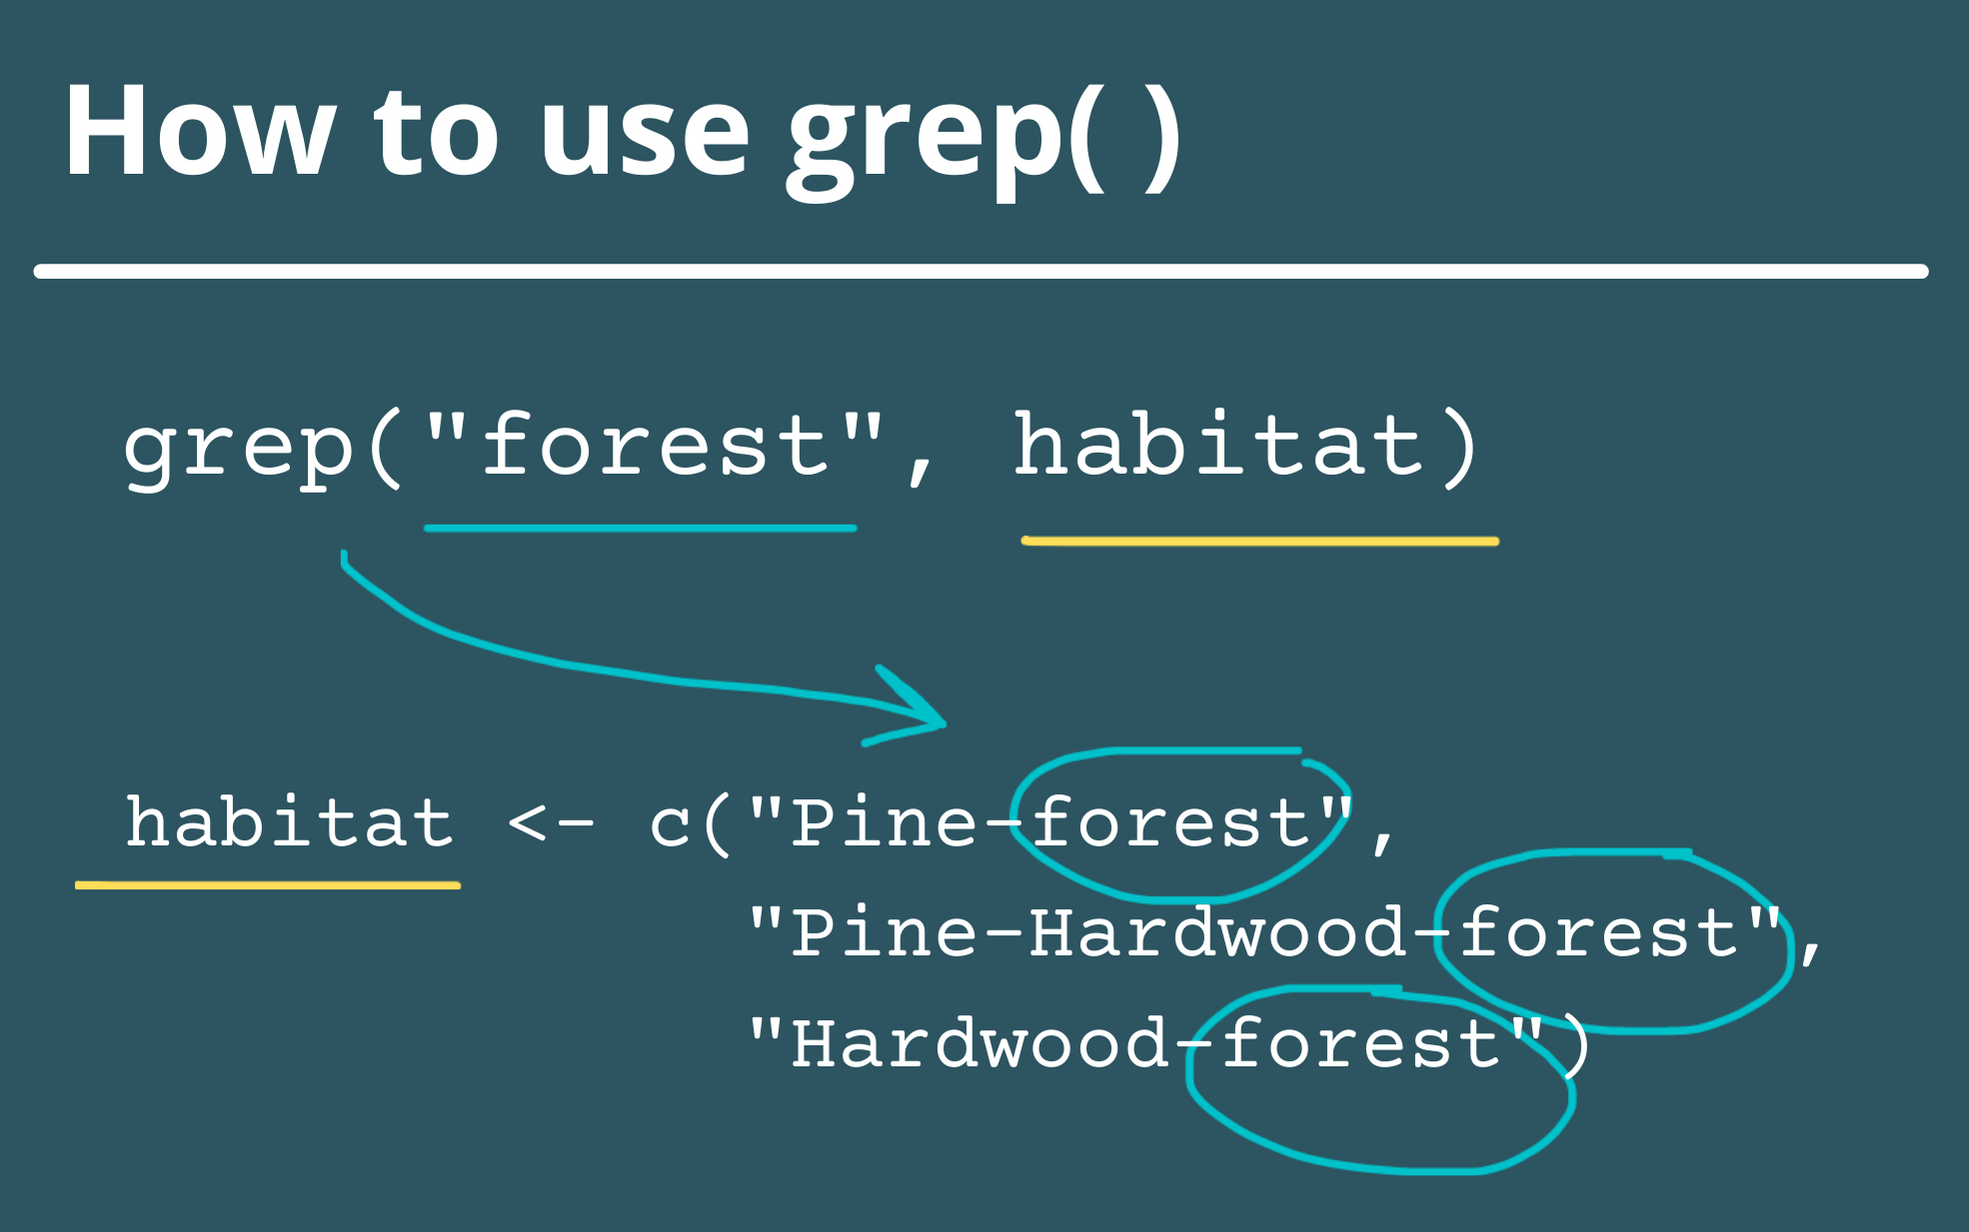 How to use grep, with example text showing the grep function searching for the word forest within a vector of habitat types